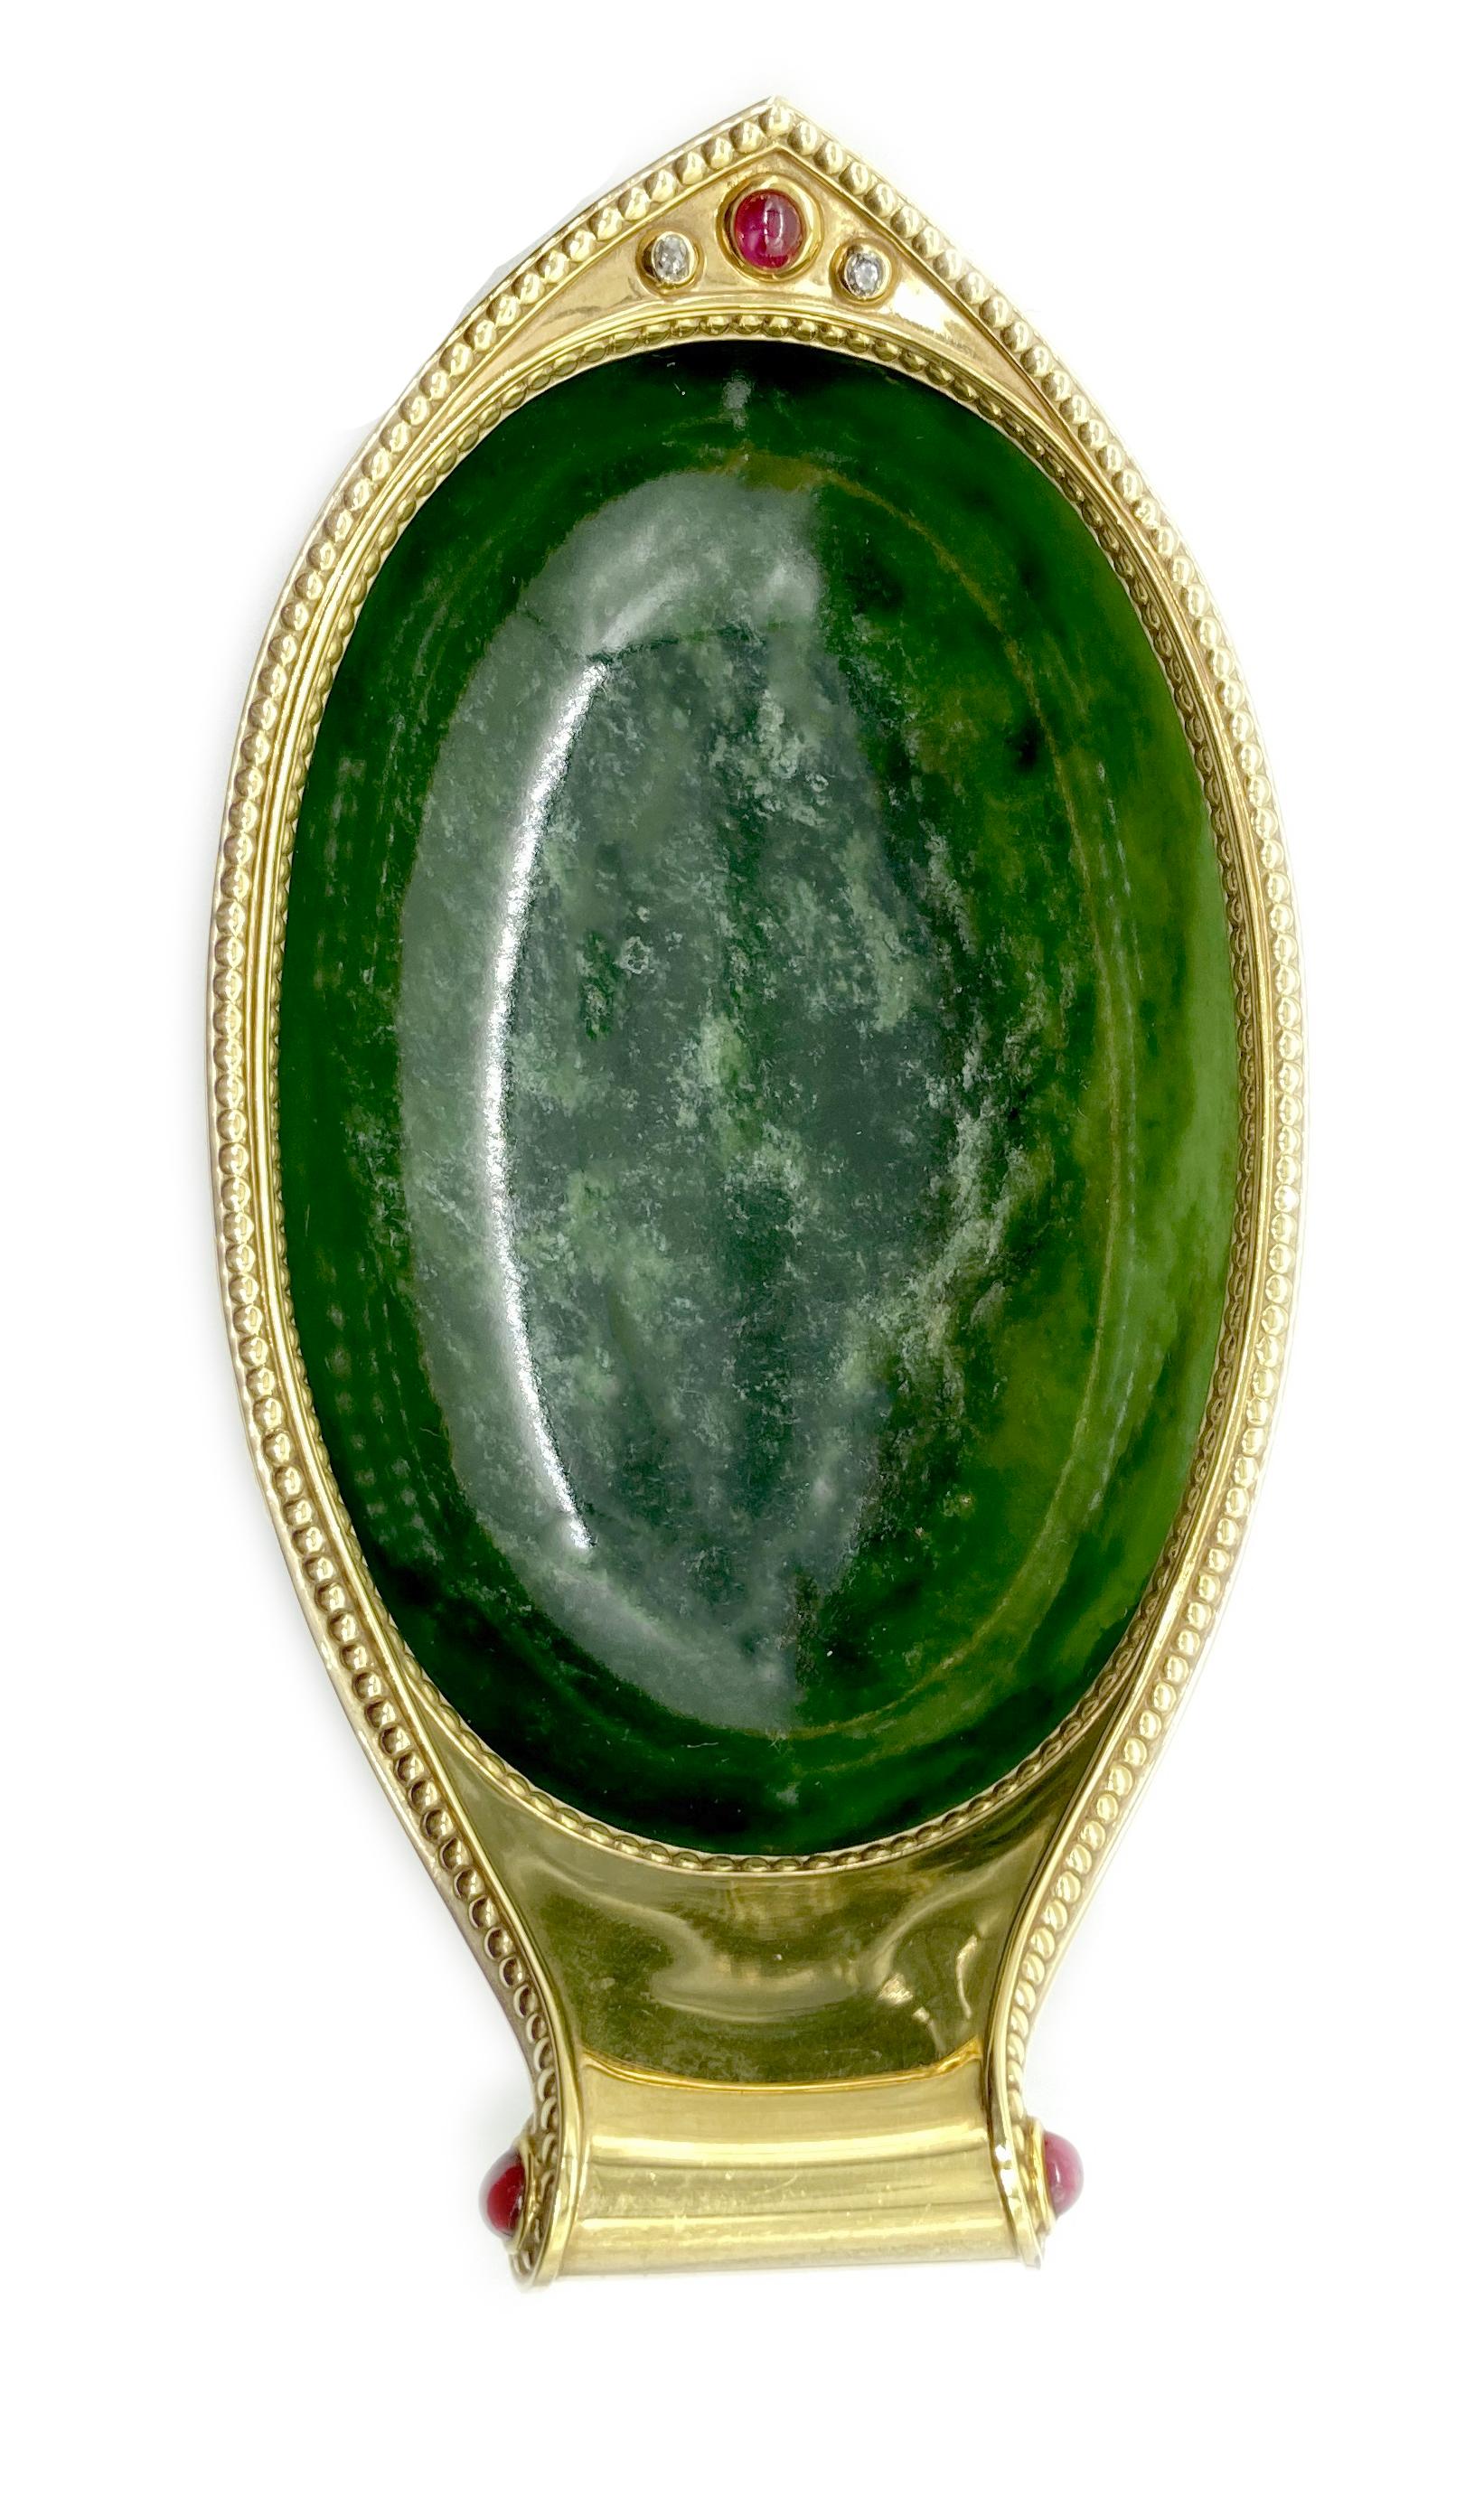 An antique nineteenth century nephrite, gold, and ruby kovsh by Fabergé. Certificate available. The Kovsh is a traditional drinking vessel or ladle from Russia. Versions in precious metals and stones were produced as gifts to be given by the royal